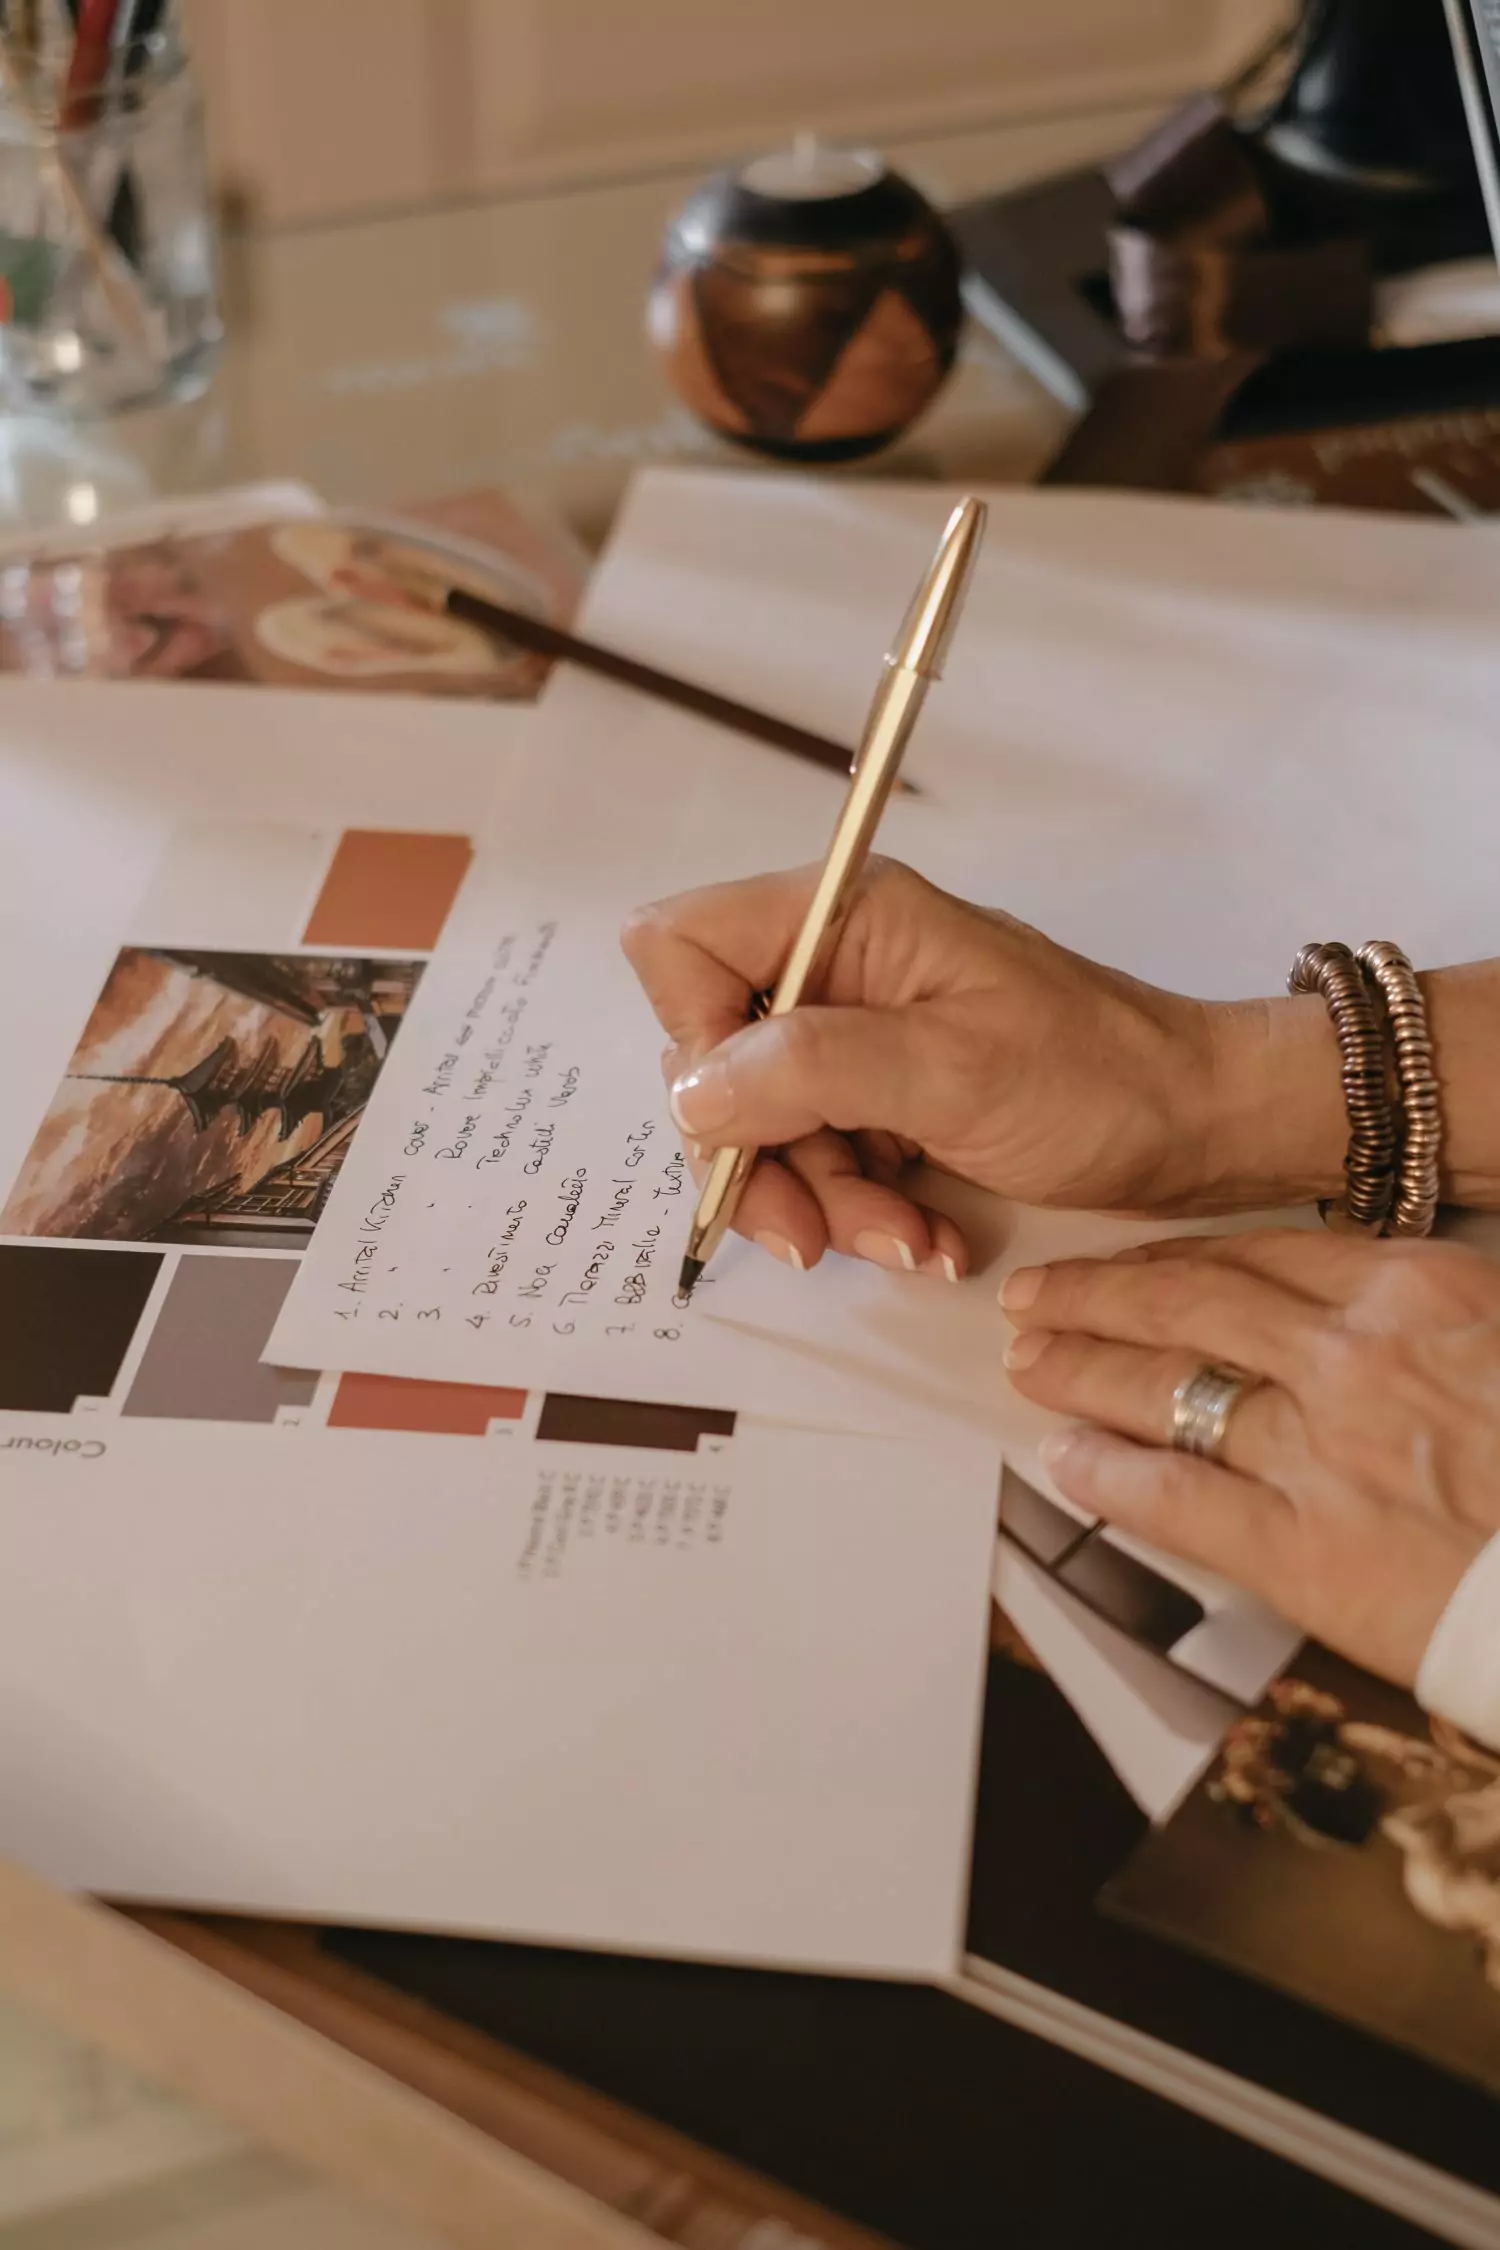 Detail of the hand of interior designer Stefania Luraghi, owner of Elles Interior Design, as she takes notes.